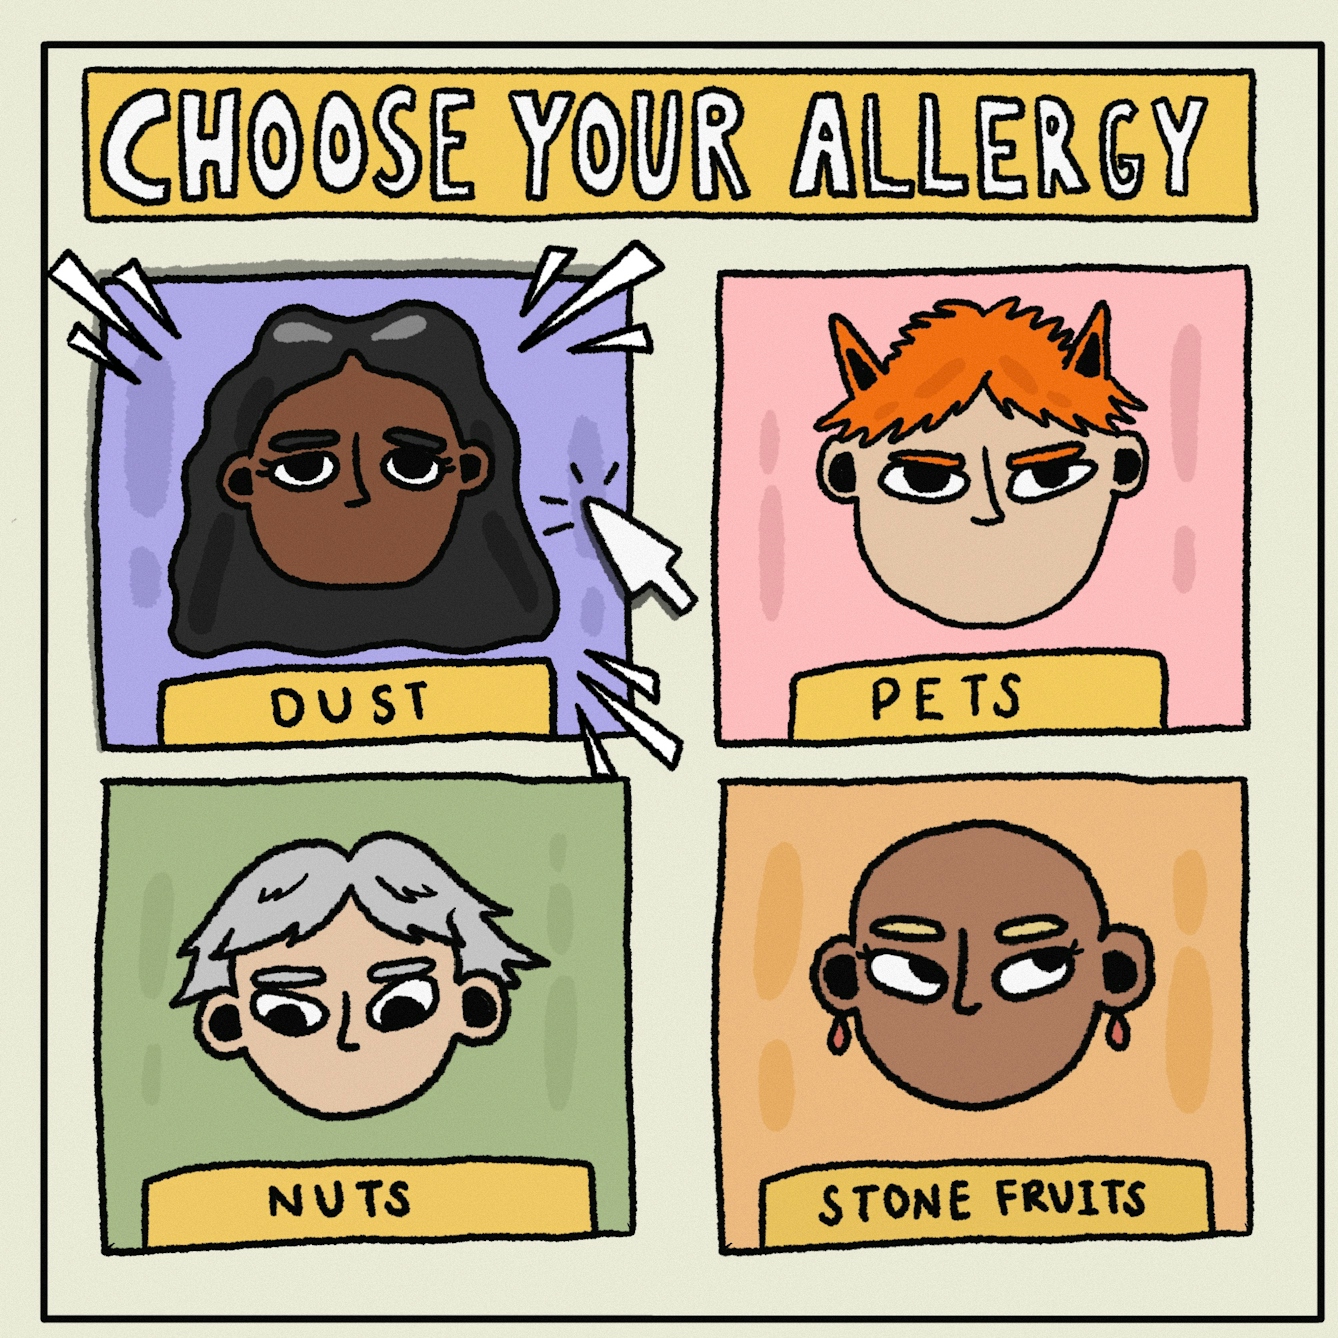 Panel 1 of a digitally drawn, four-panel comic titled ‘Last man standing’. The text at the top reads “CHOOSE YOUR ALLERGY”. The box in the top left is labelled ‘DUST’ and, in it, is a character with brown skin and long, black, wavy hair. A cartoon cursor is clicking over this box to signal this is the allergy you have chosen. There are three other boxes with characters that have not been chosen, labelled ‘pets’, ‘nuts’ and ‘stone fruits’.